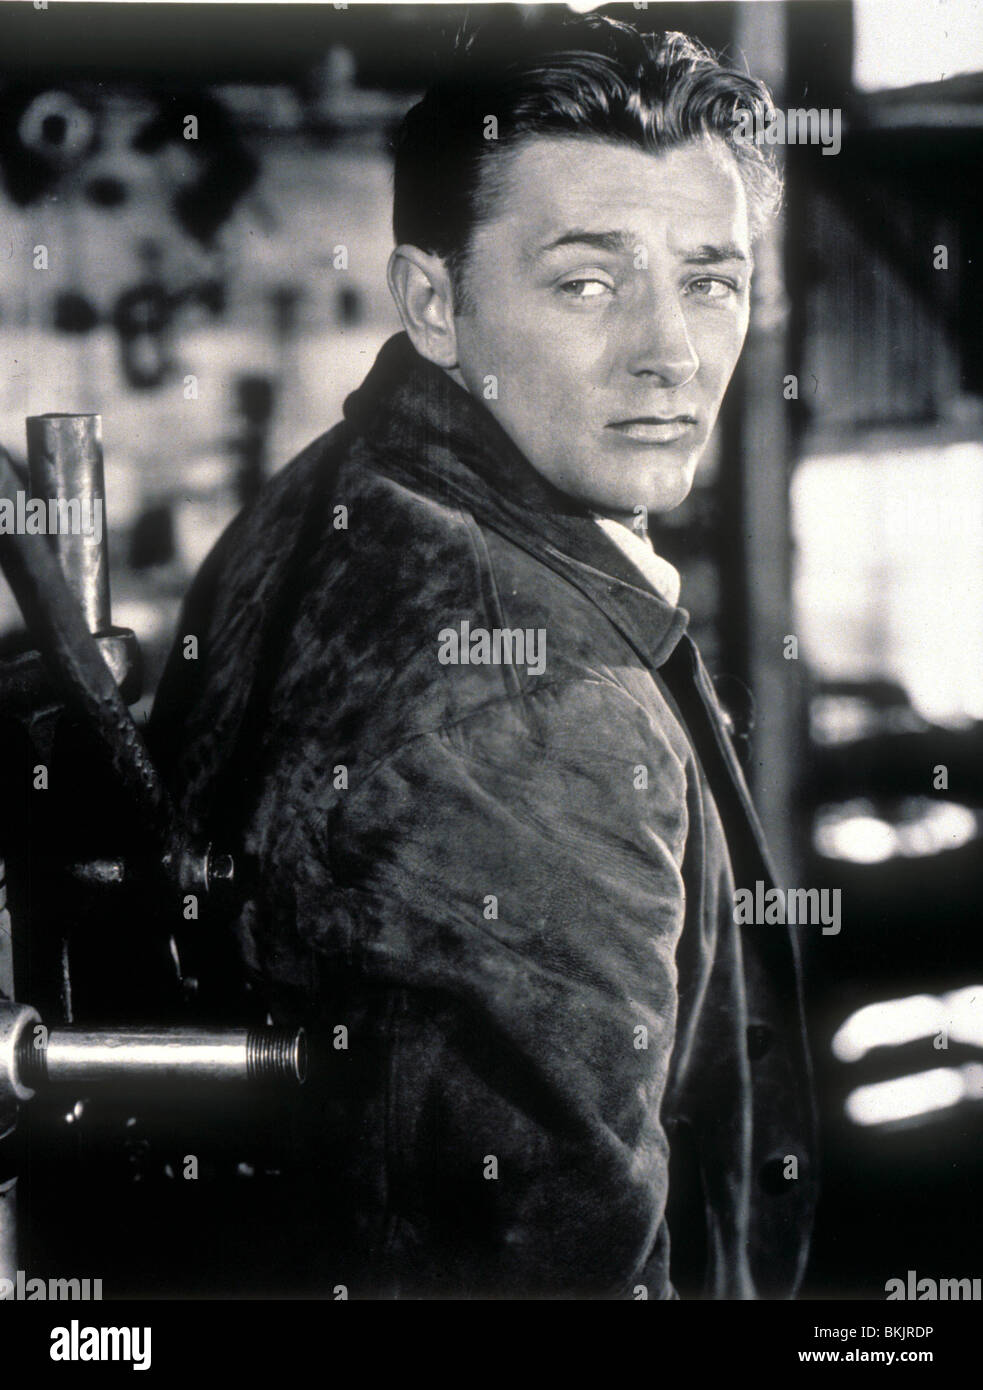 ROBERT MITCHUM O/S "OUT OF THE PAST" (1947) RBMH 012 Stockfoto